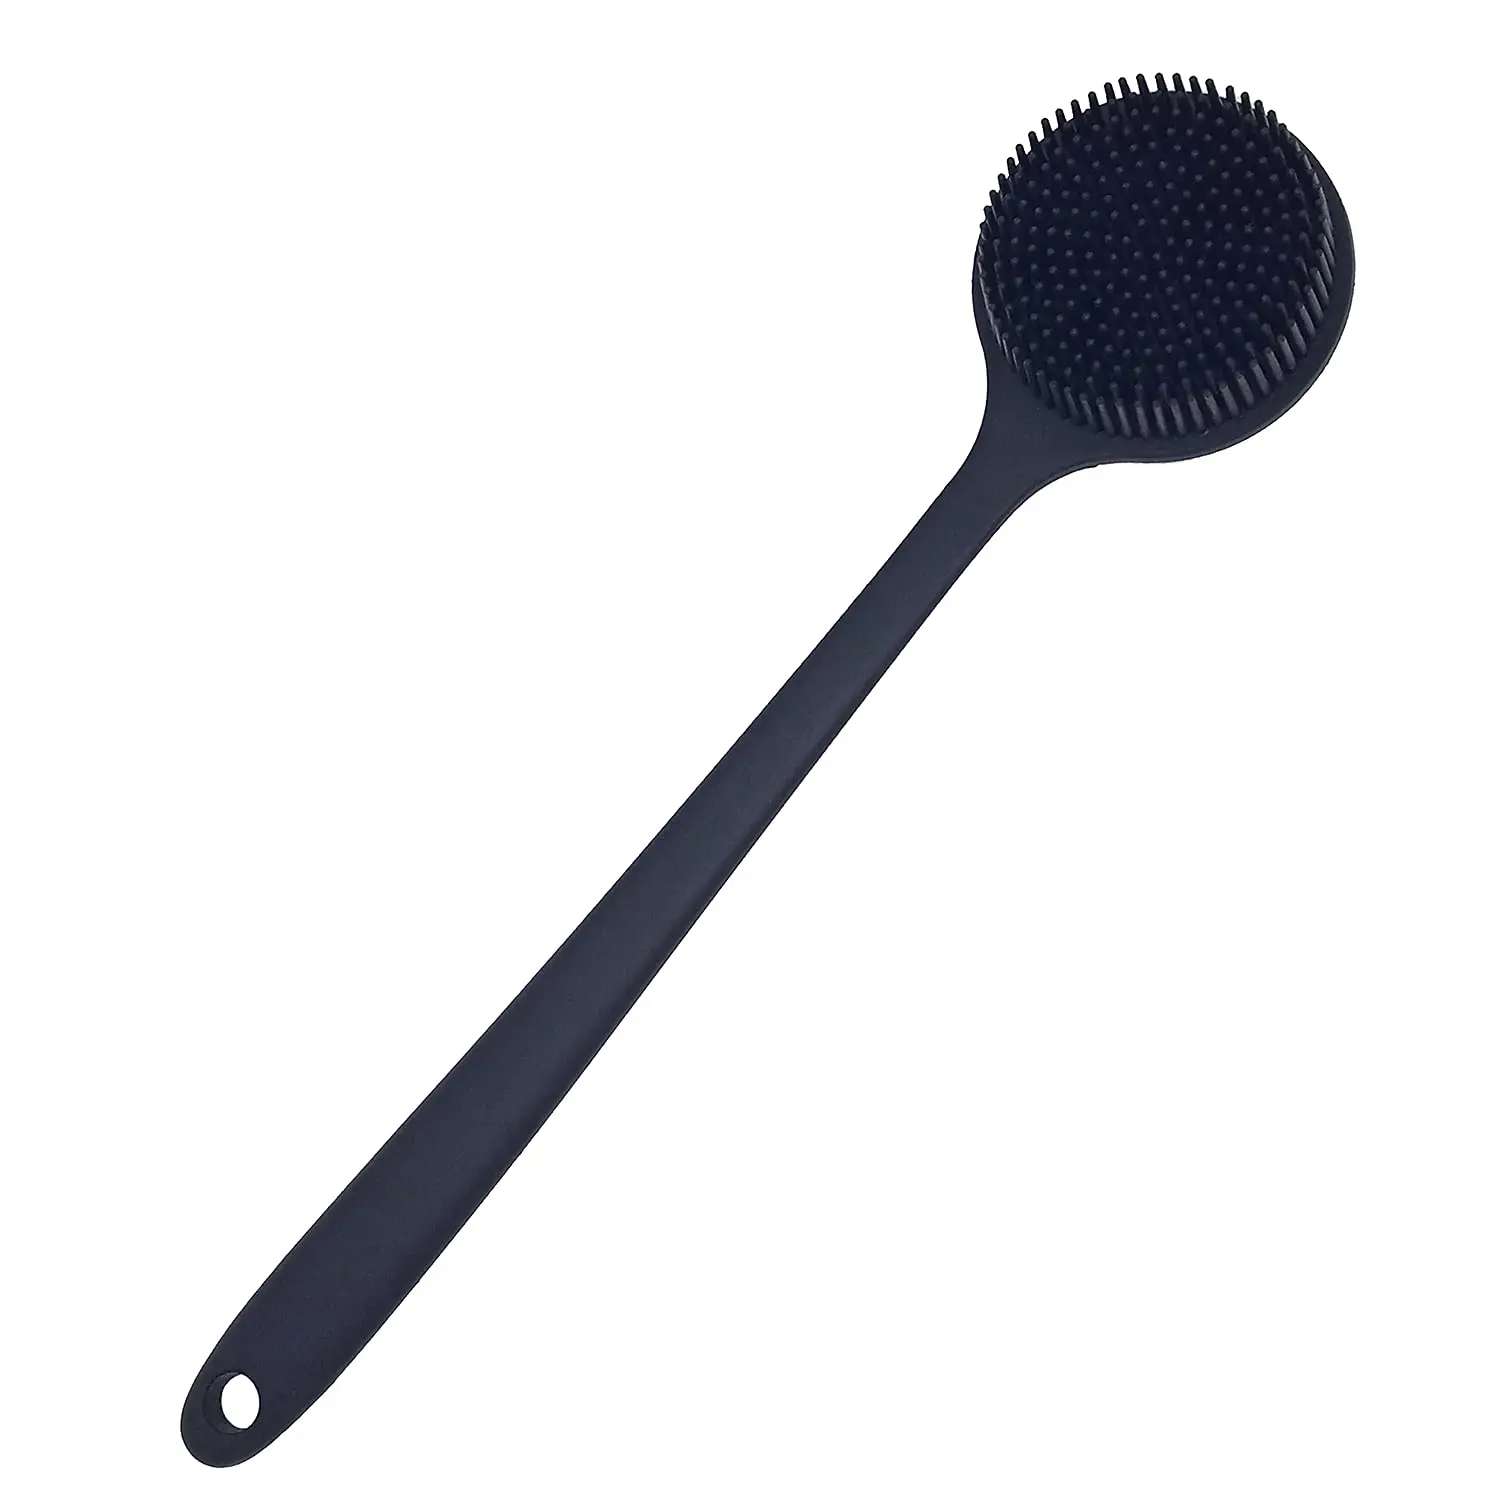 Soft Silicone Back Scrubber Shower Bath Body Brush with Long Handle, BPA-Free, Hypoallergenic, Eco-Friendly (Black)